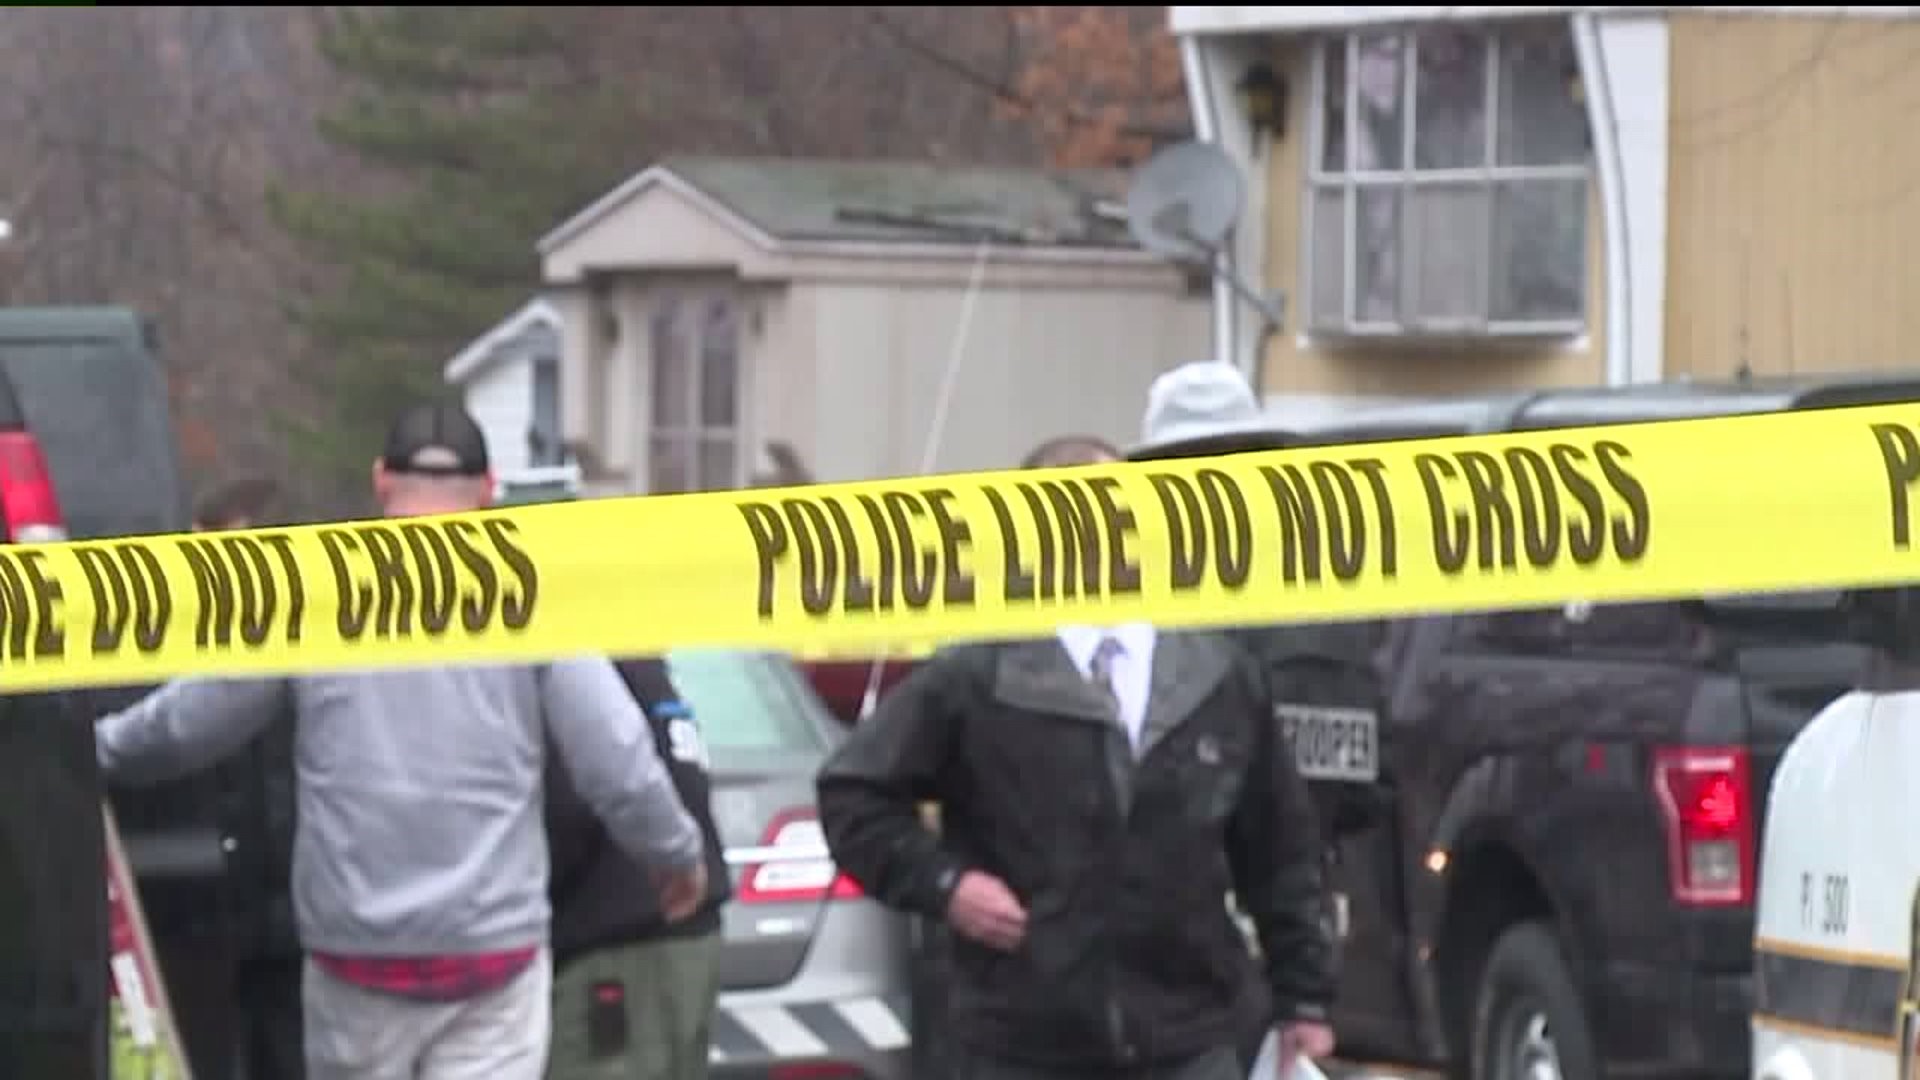 Neighbors Puzzled as Trailer Park Death Investigation Goes On